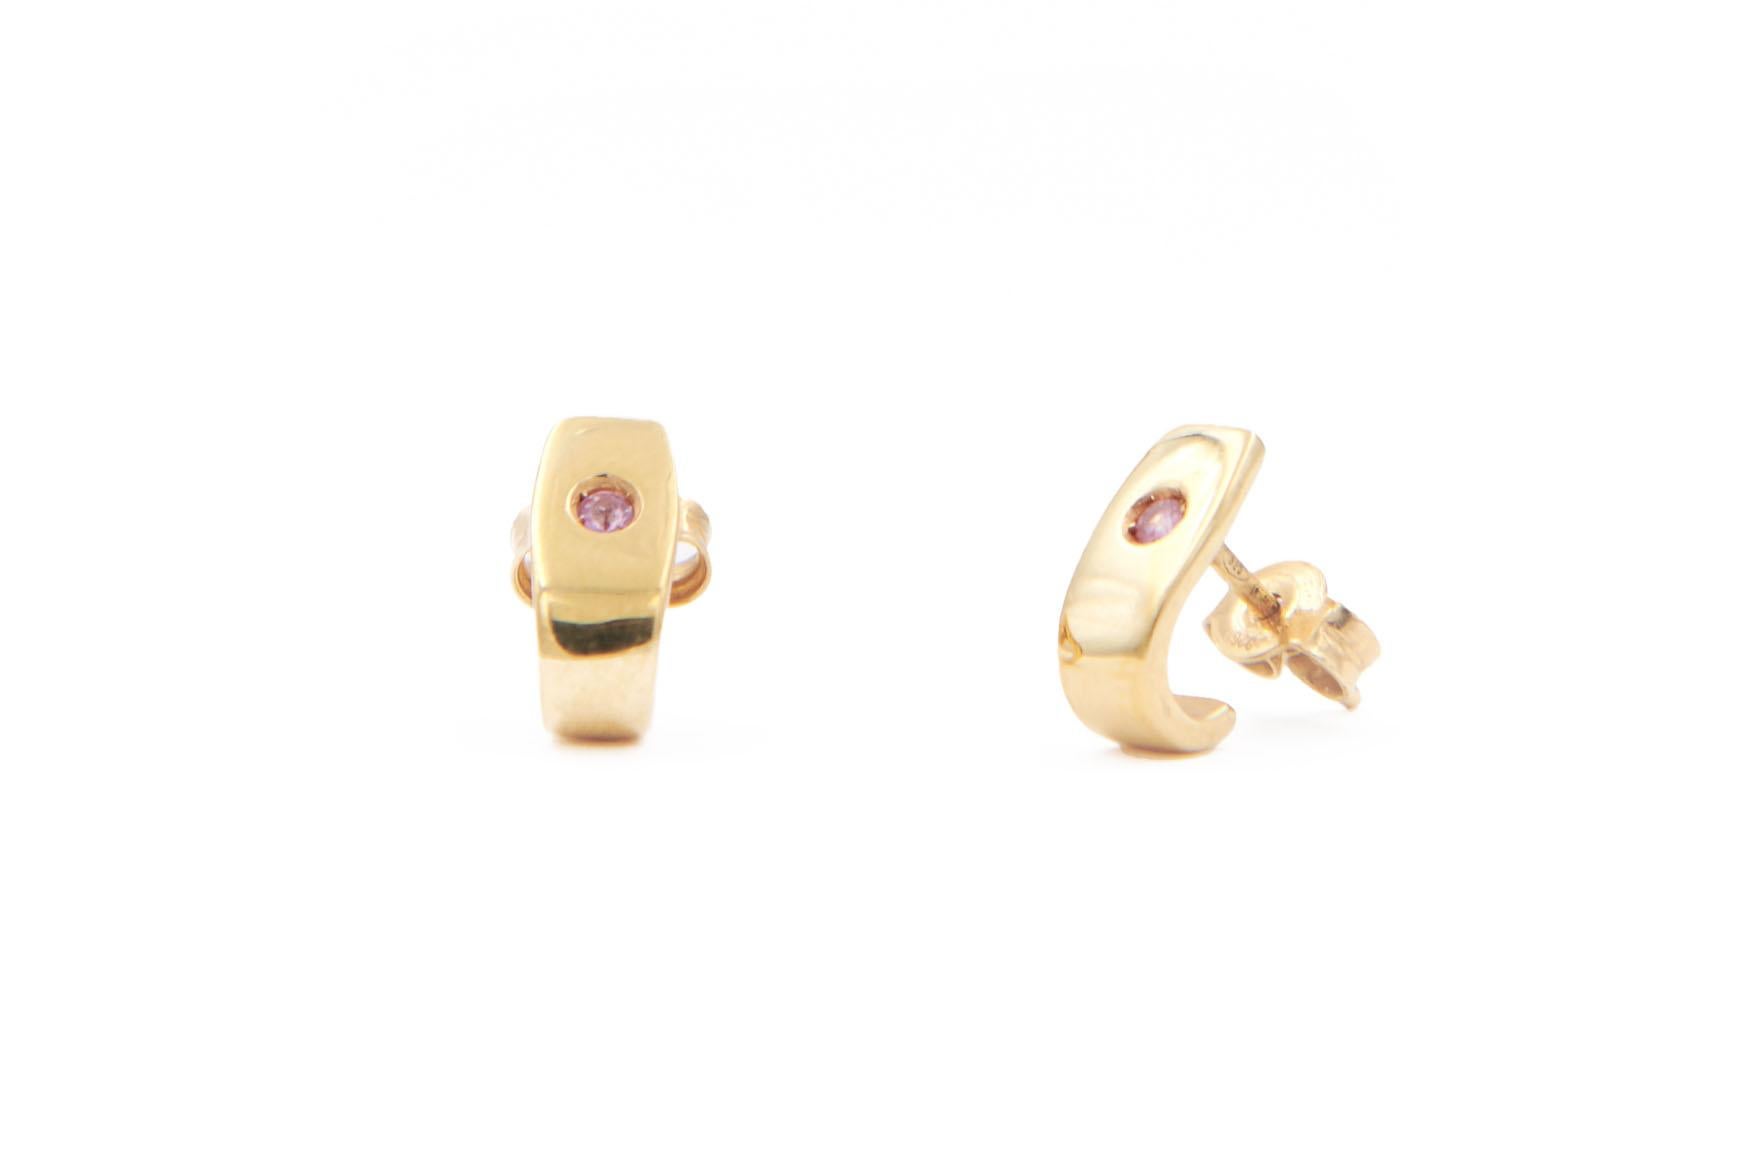 18 karat yellow gold cuff earrings set with pink sapphires.  

These earrings form part of Julia-Didon Cayre's 'Mezzanotte Milano' collection. All pieces in this collection may be personalized by using your favourite gemstones, birthstone or colour